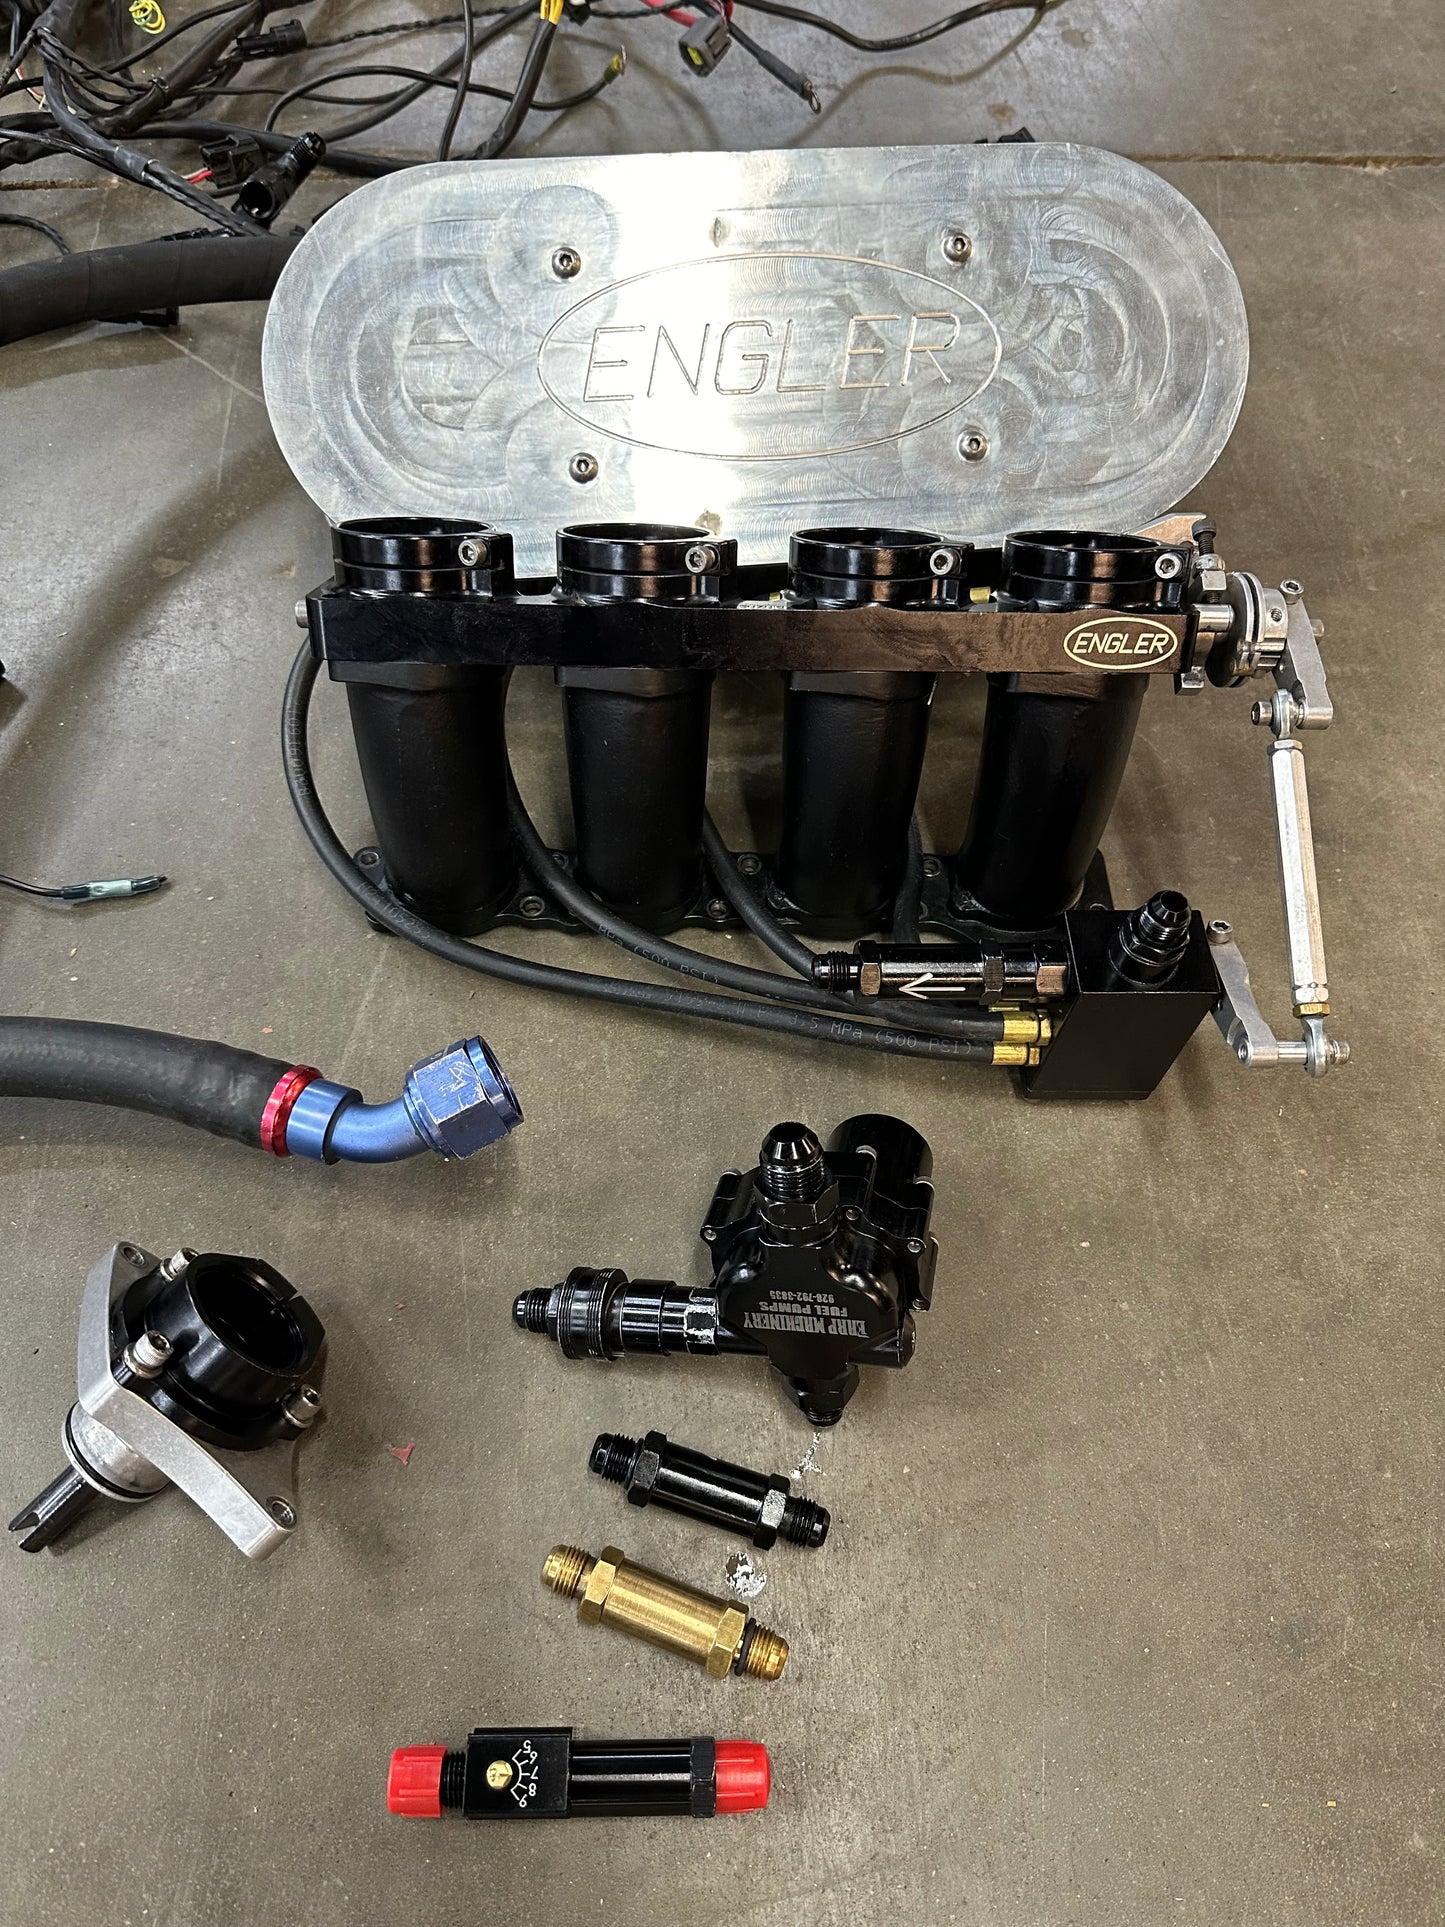 ENGLER Injection System